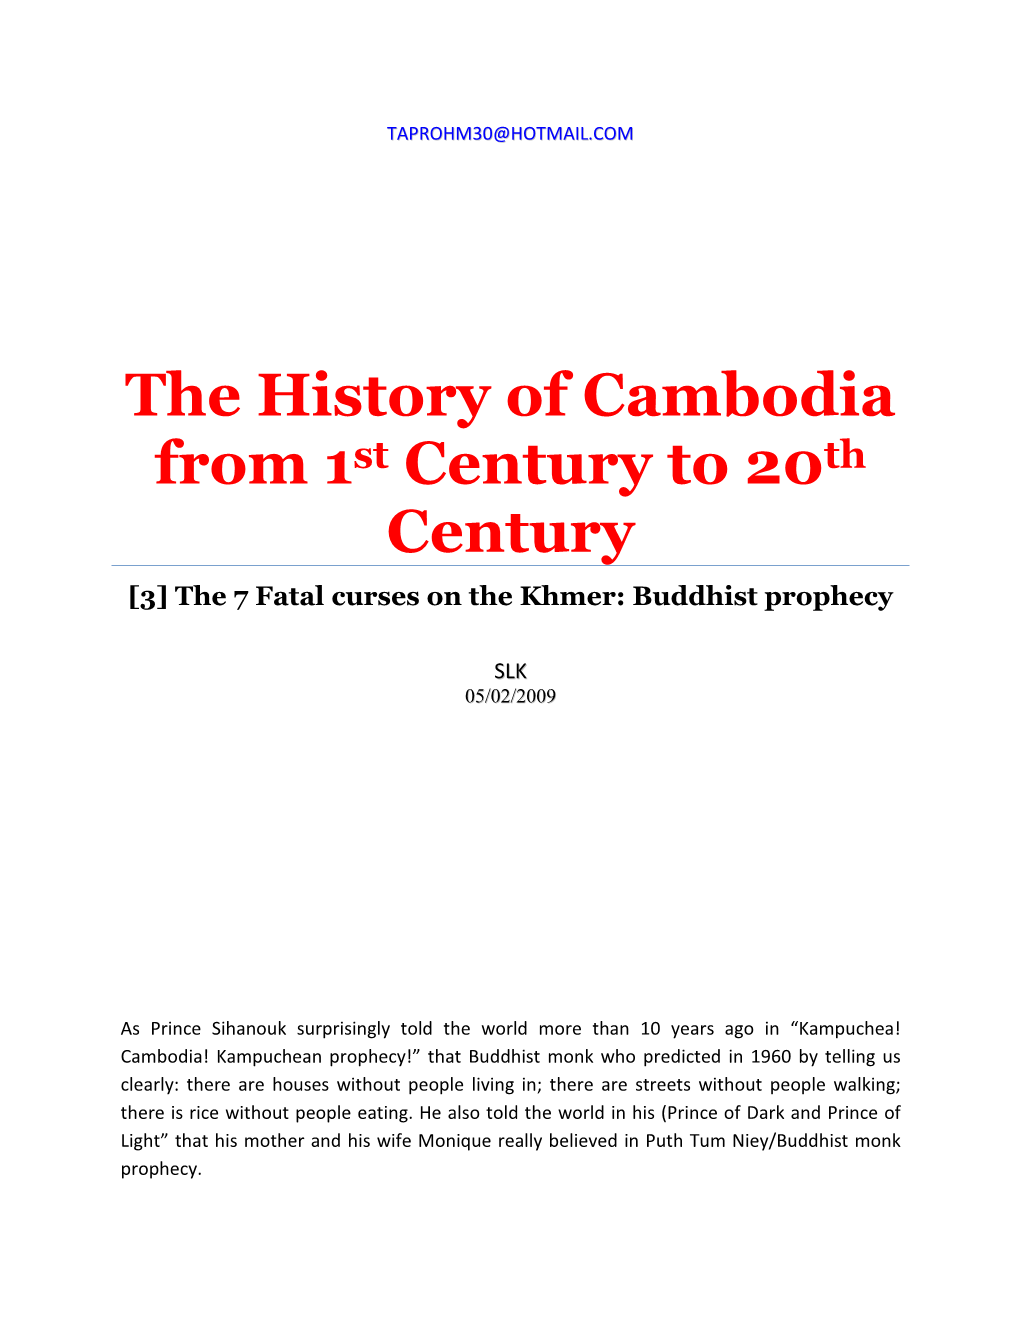 The 7 Fatal Curses on the Khmer: Buddhist Prophecy